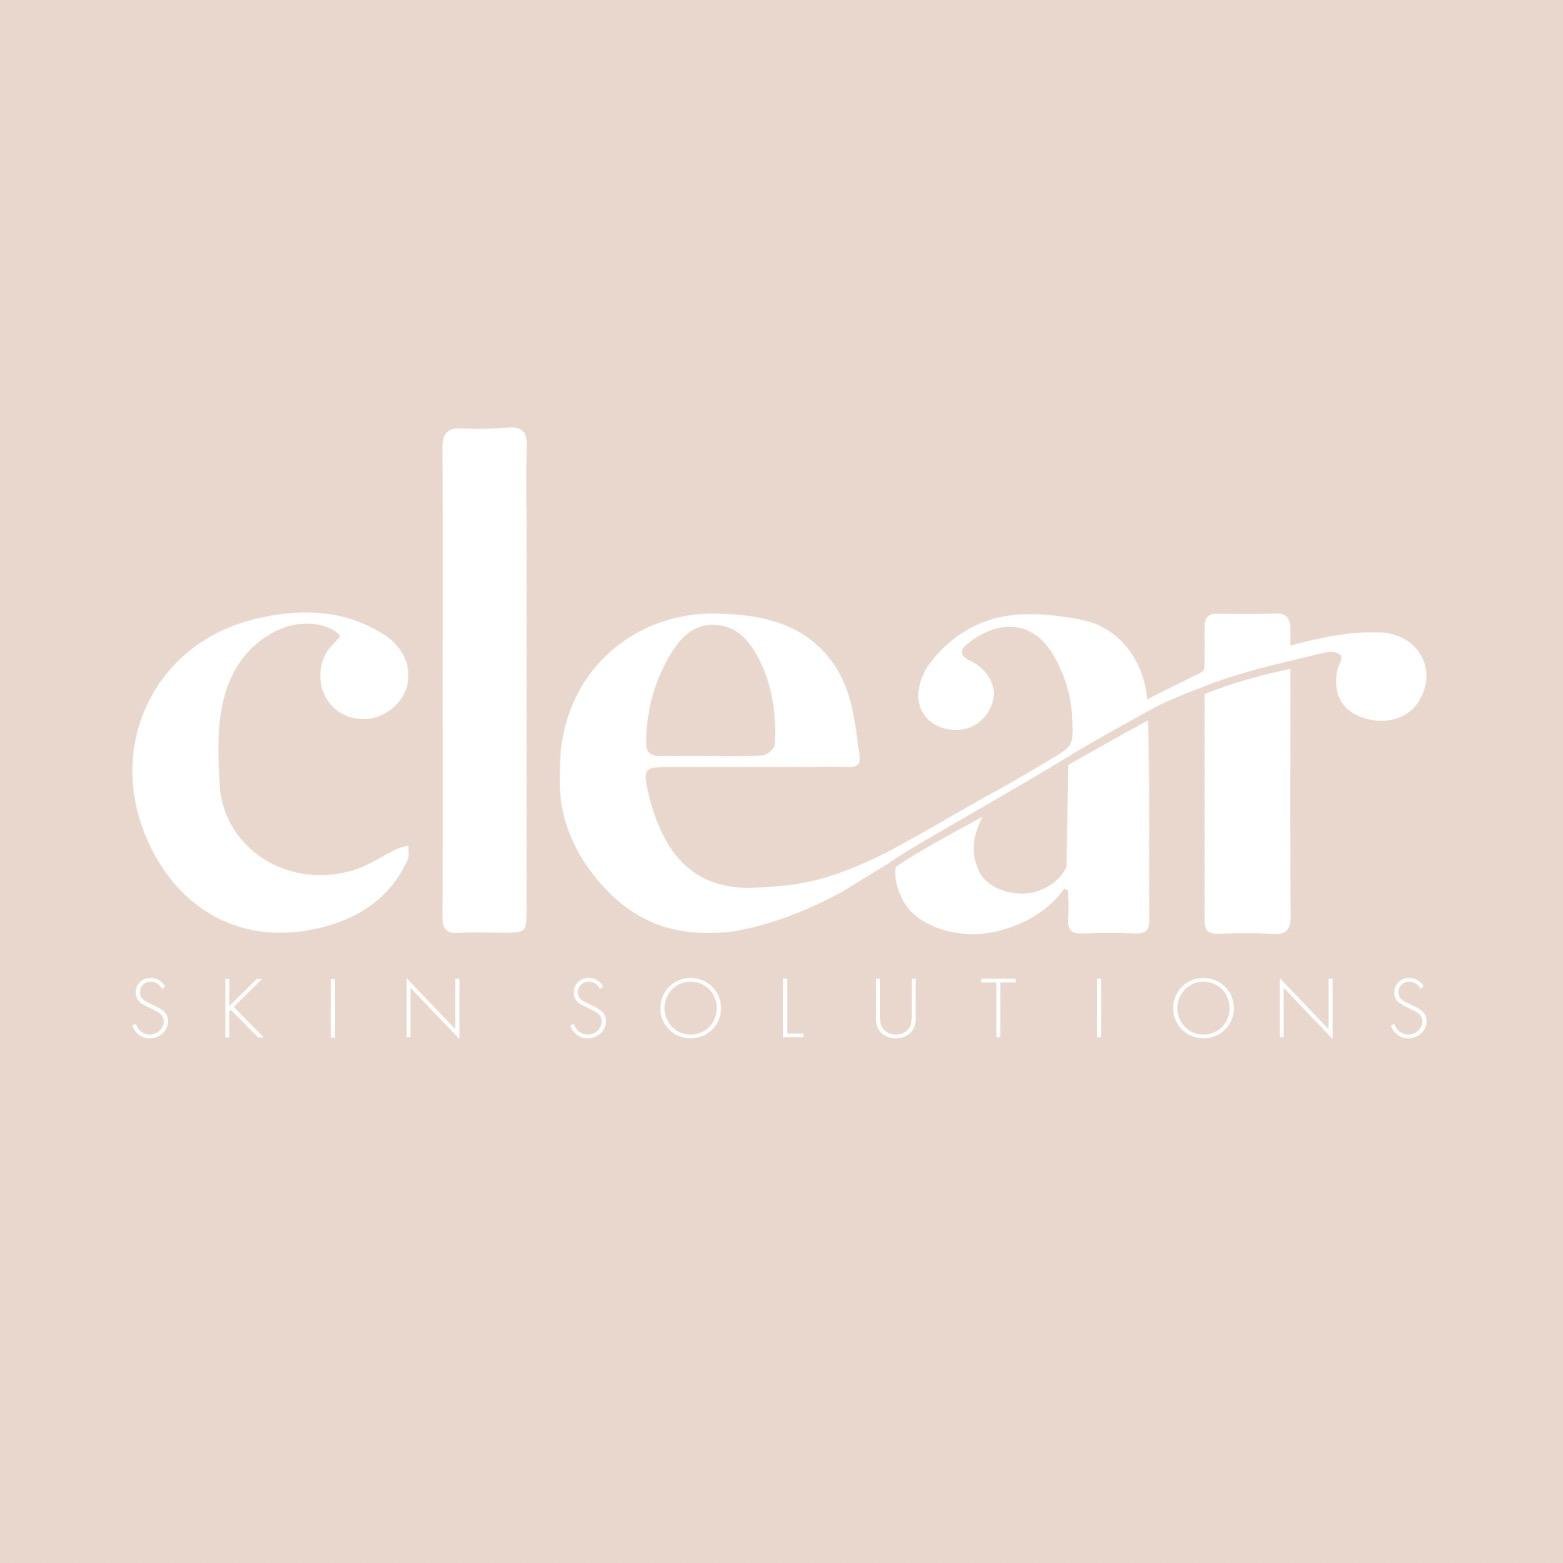 Clear Skin Solutions Hero